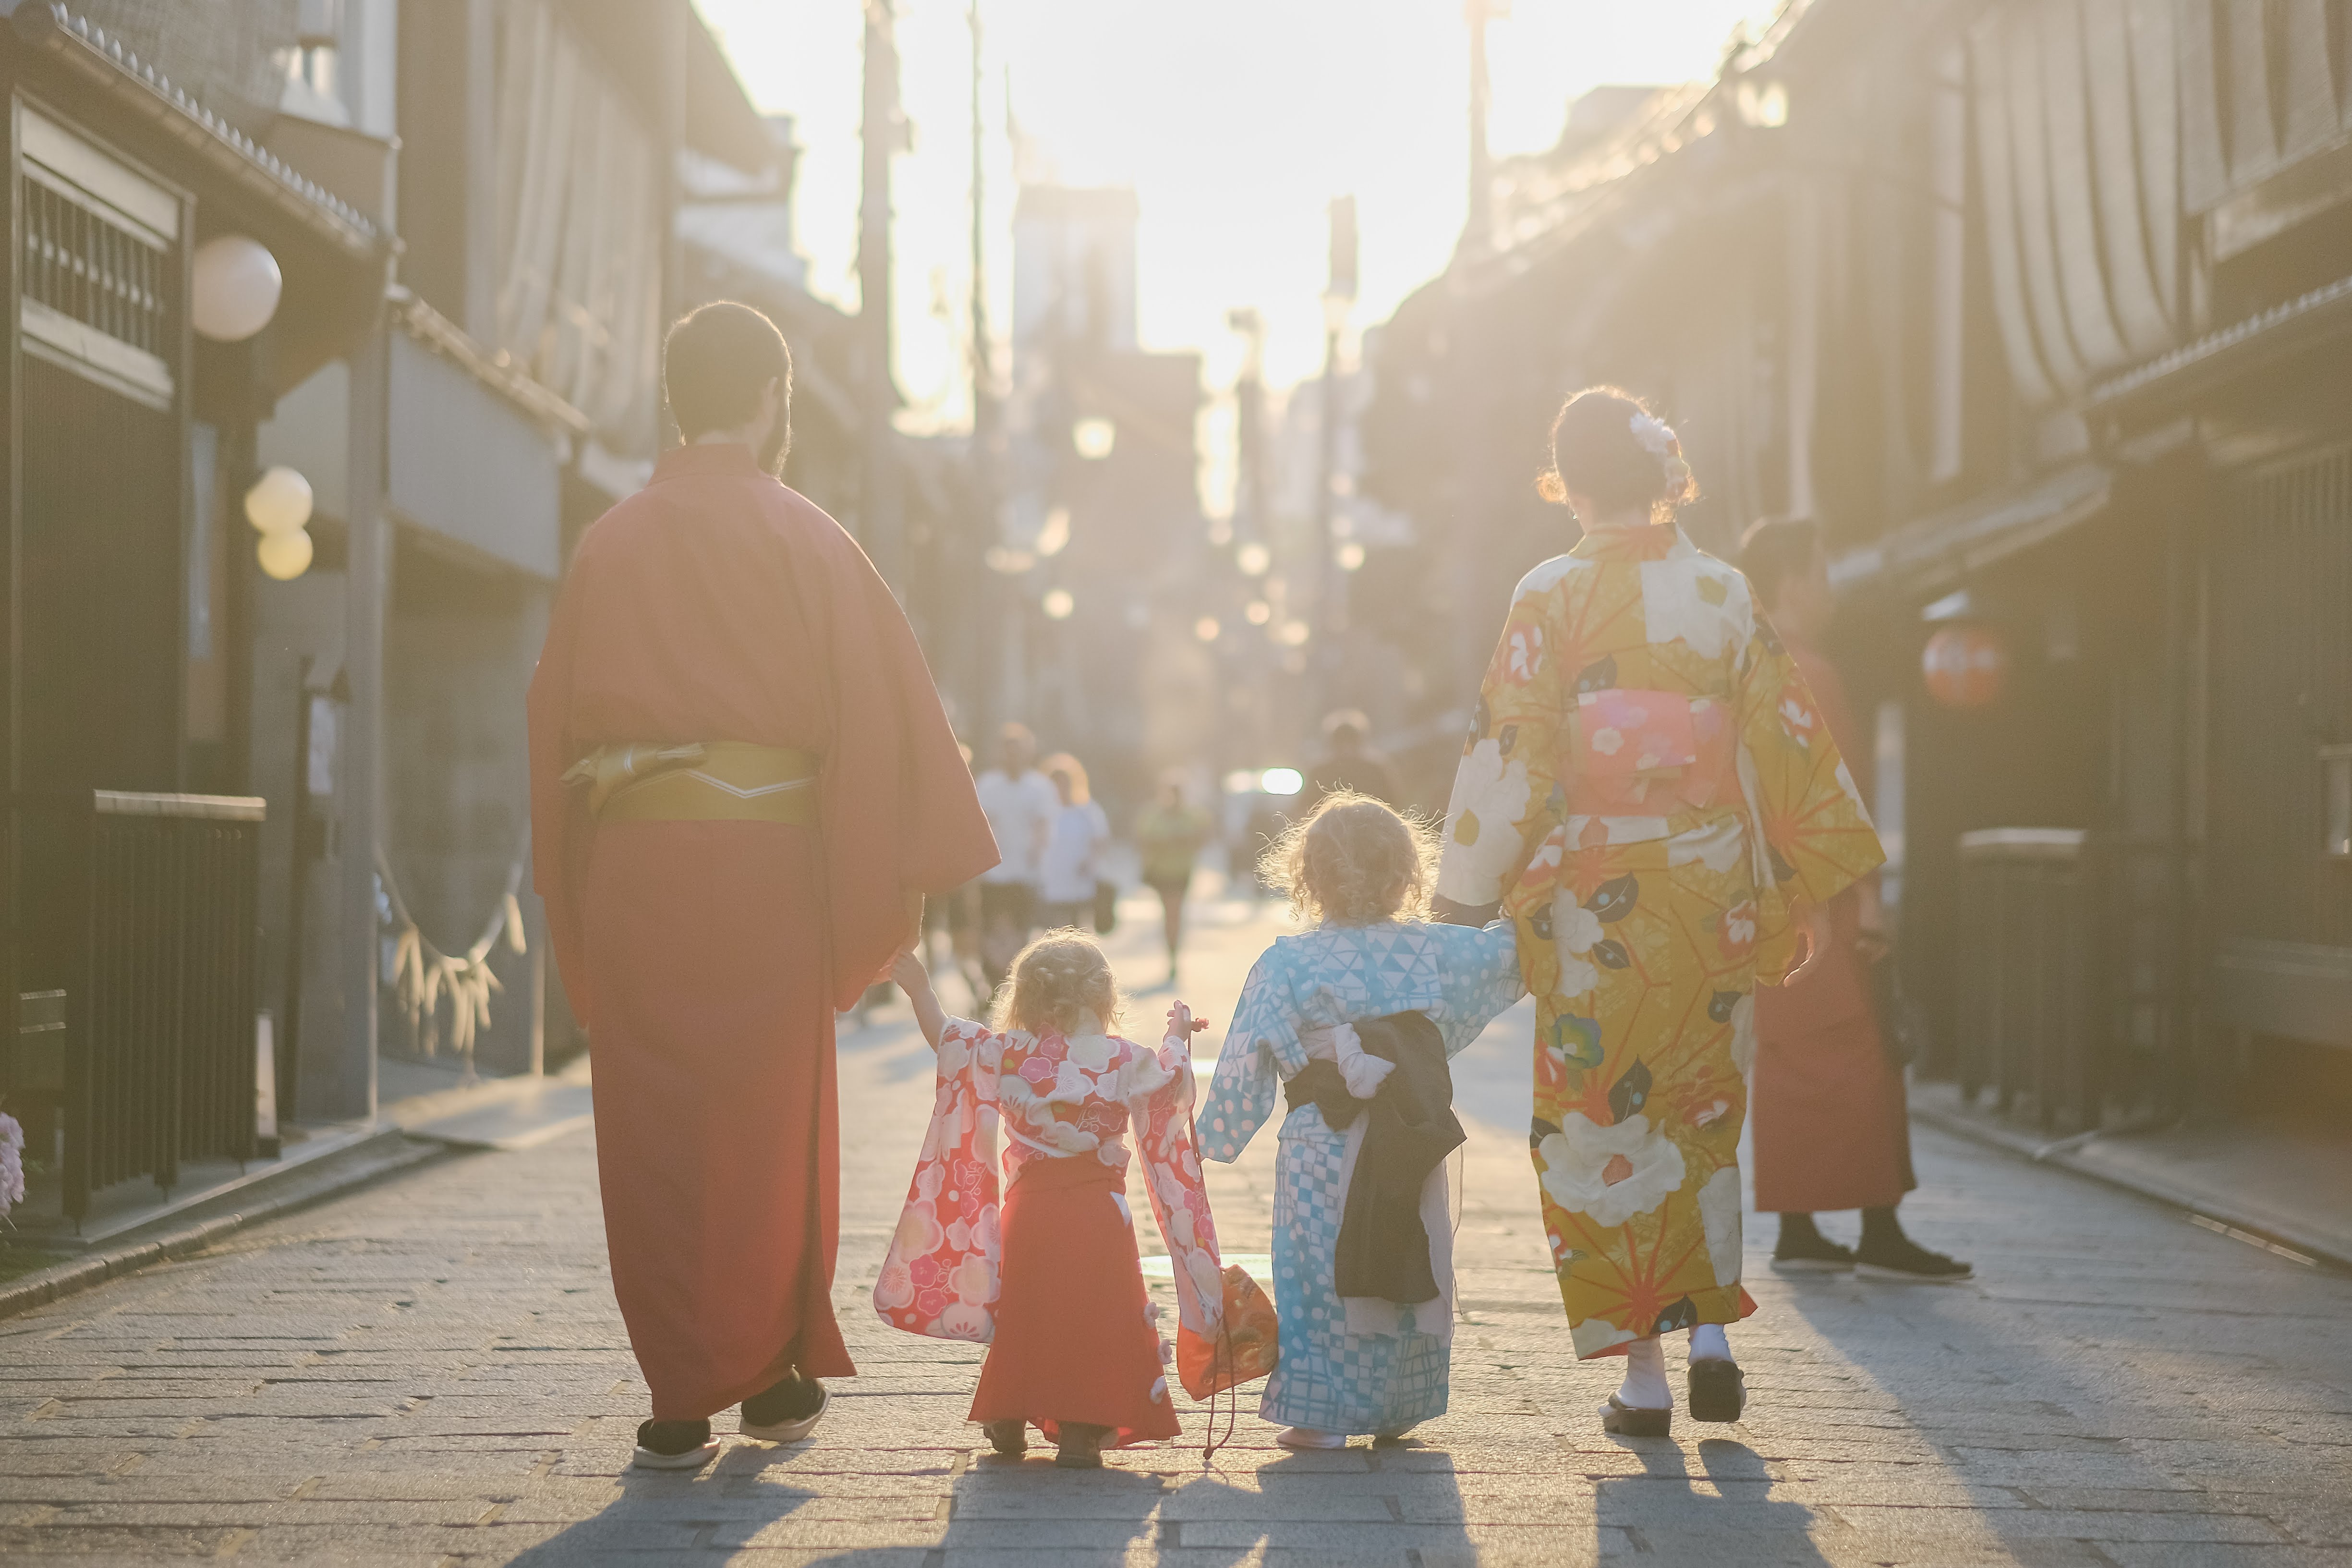 Freelance family photographer in Kyoto